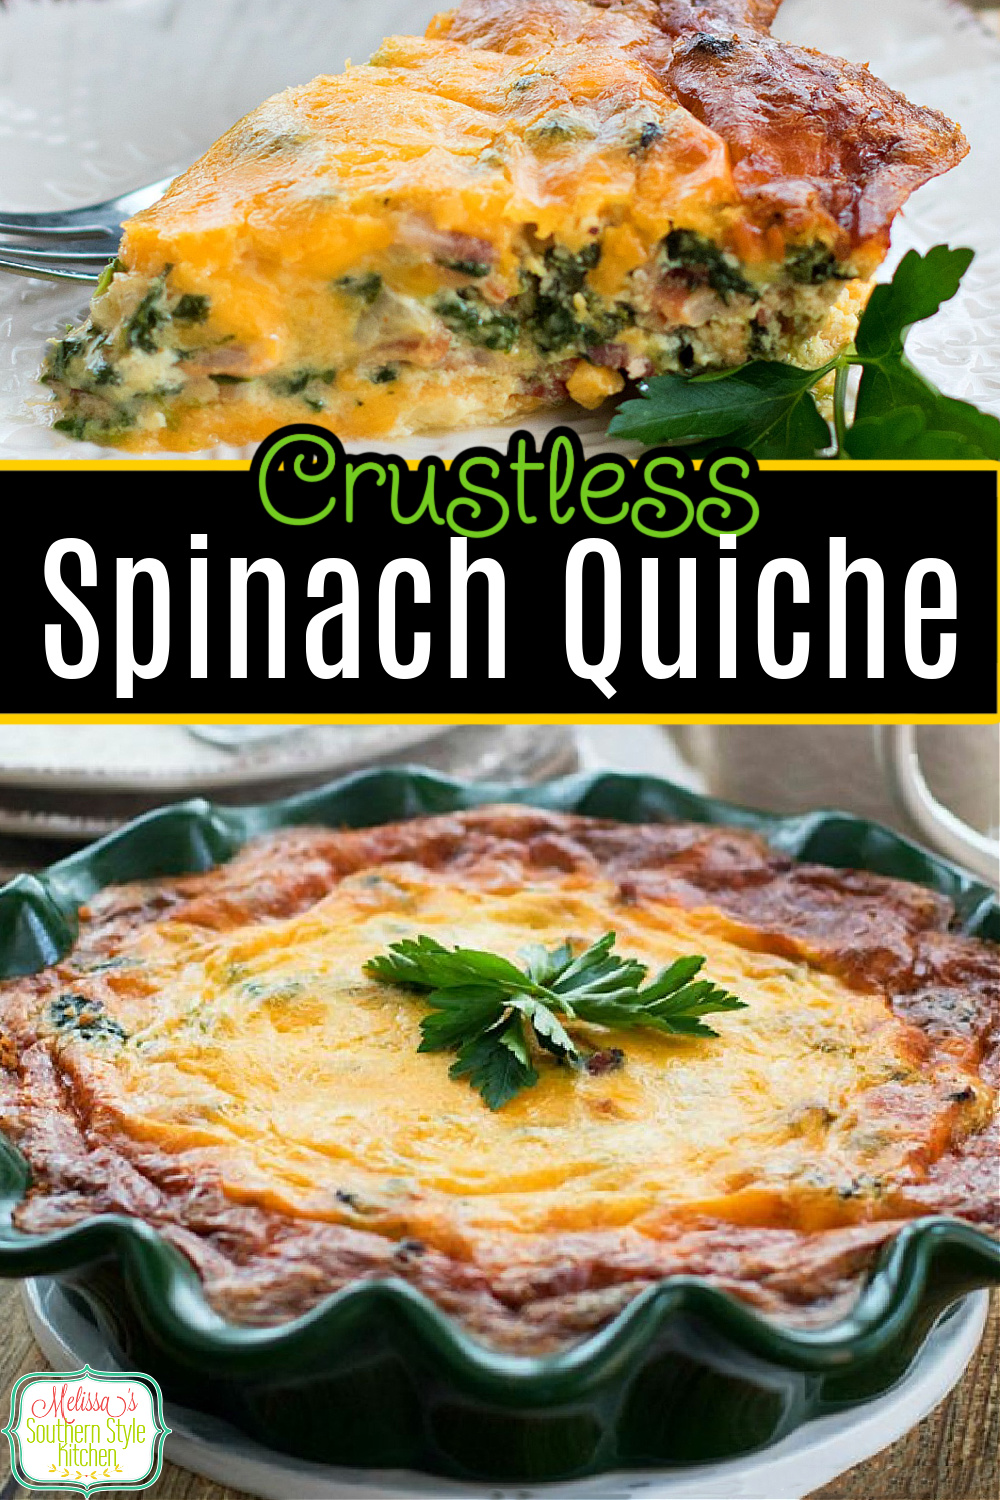 This cheesy deep dish Crustless Spinach Quiche with bacon makes a scrumptious entrée for brunch, lunch or dinner #crustlessquiche #spinachquiche #quicherecipes #bacon #spinachbaconquiche #breakfastrecipes #brunchrecipes via @melissasssk